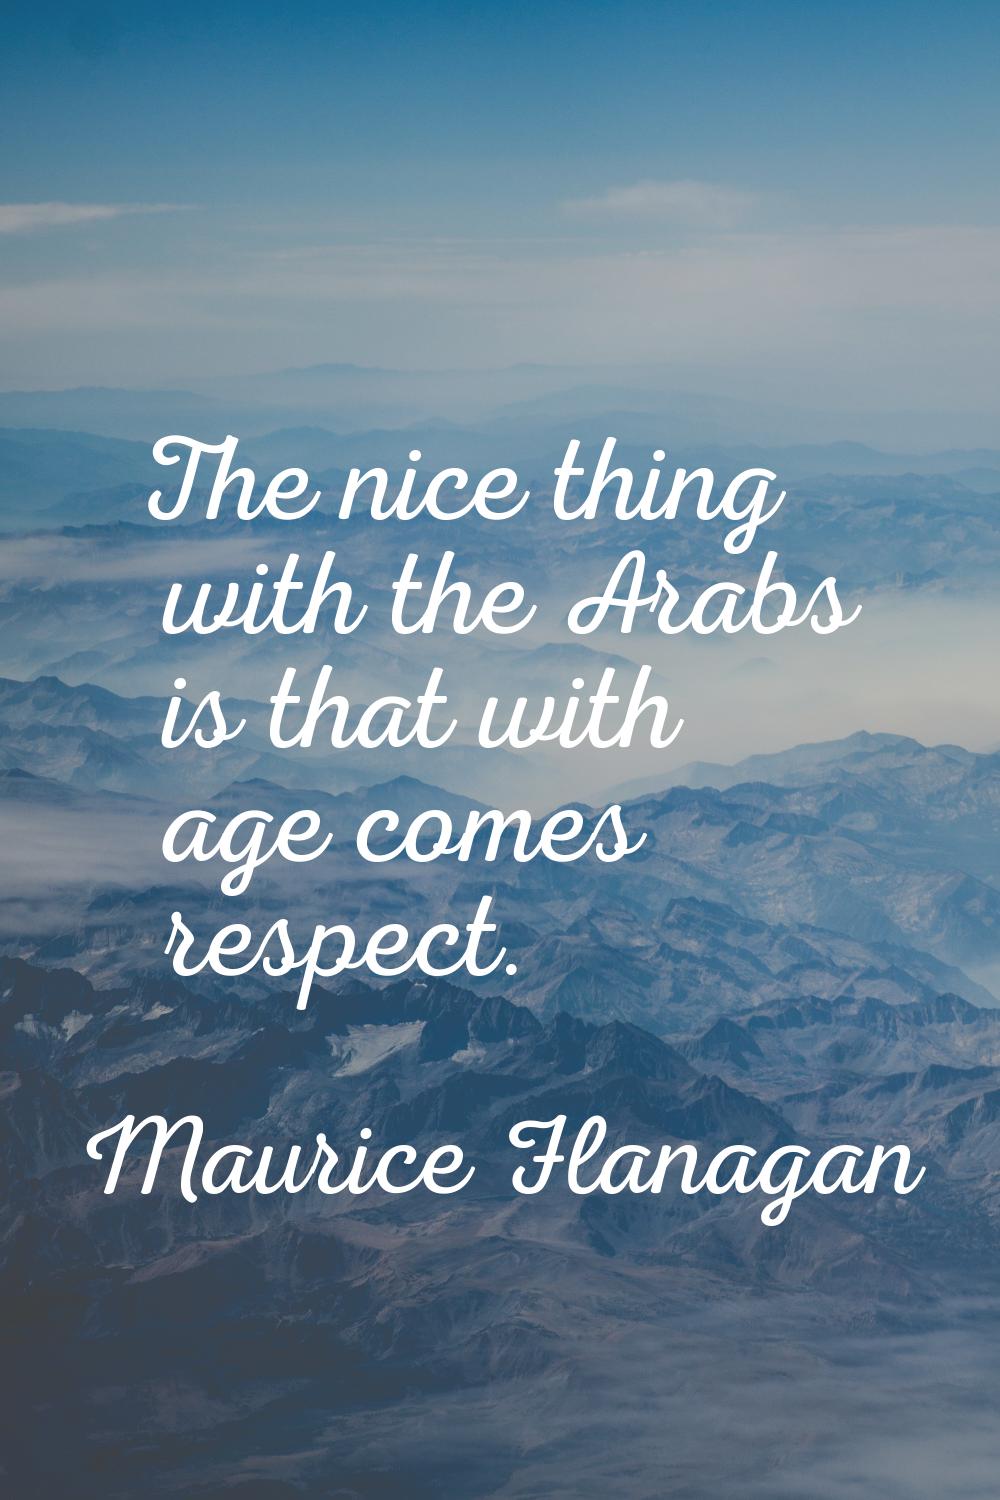 The nice thing with the Arabs is that with age comes respect.